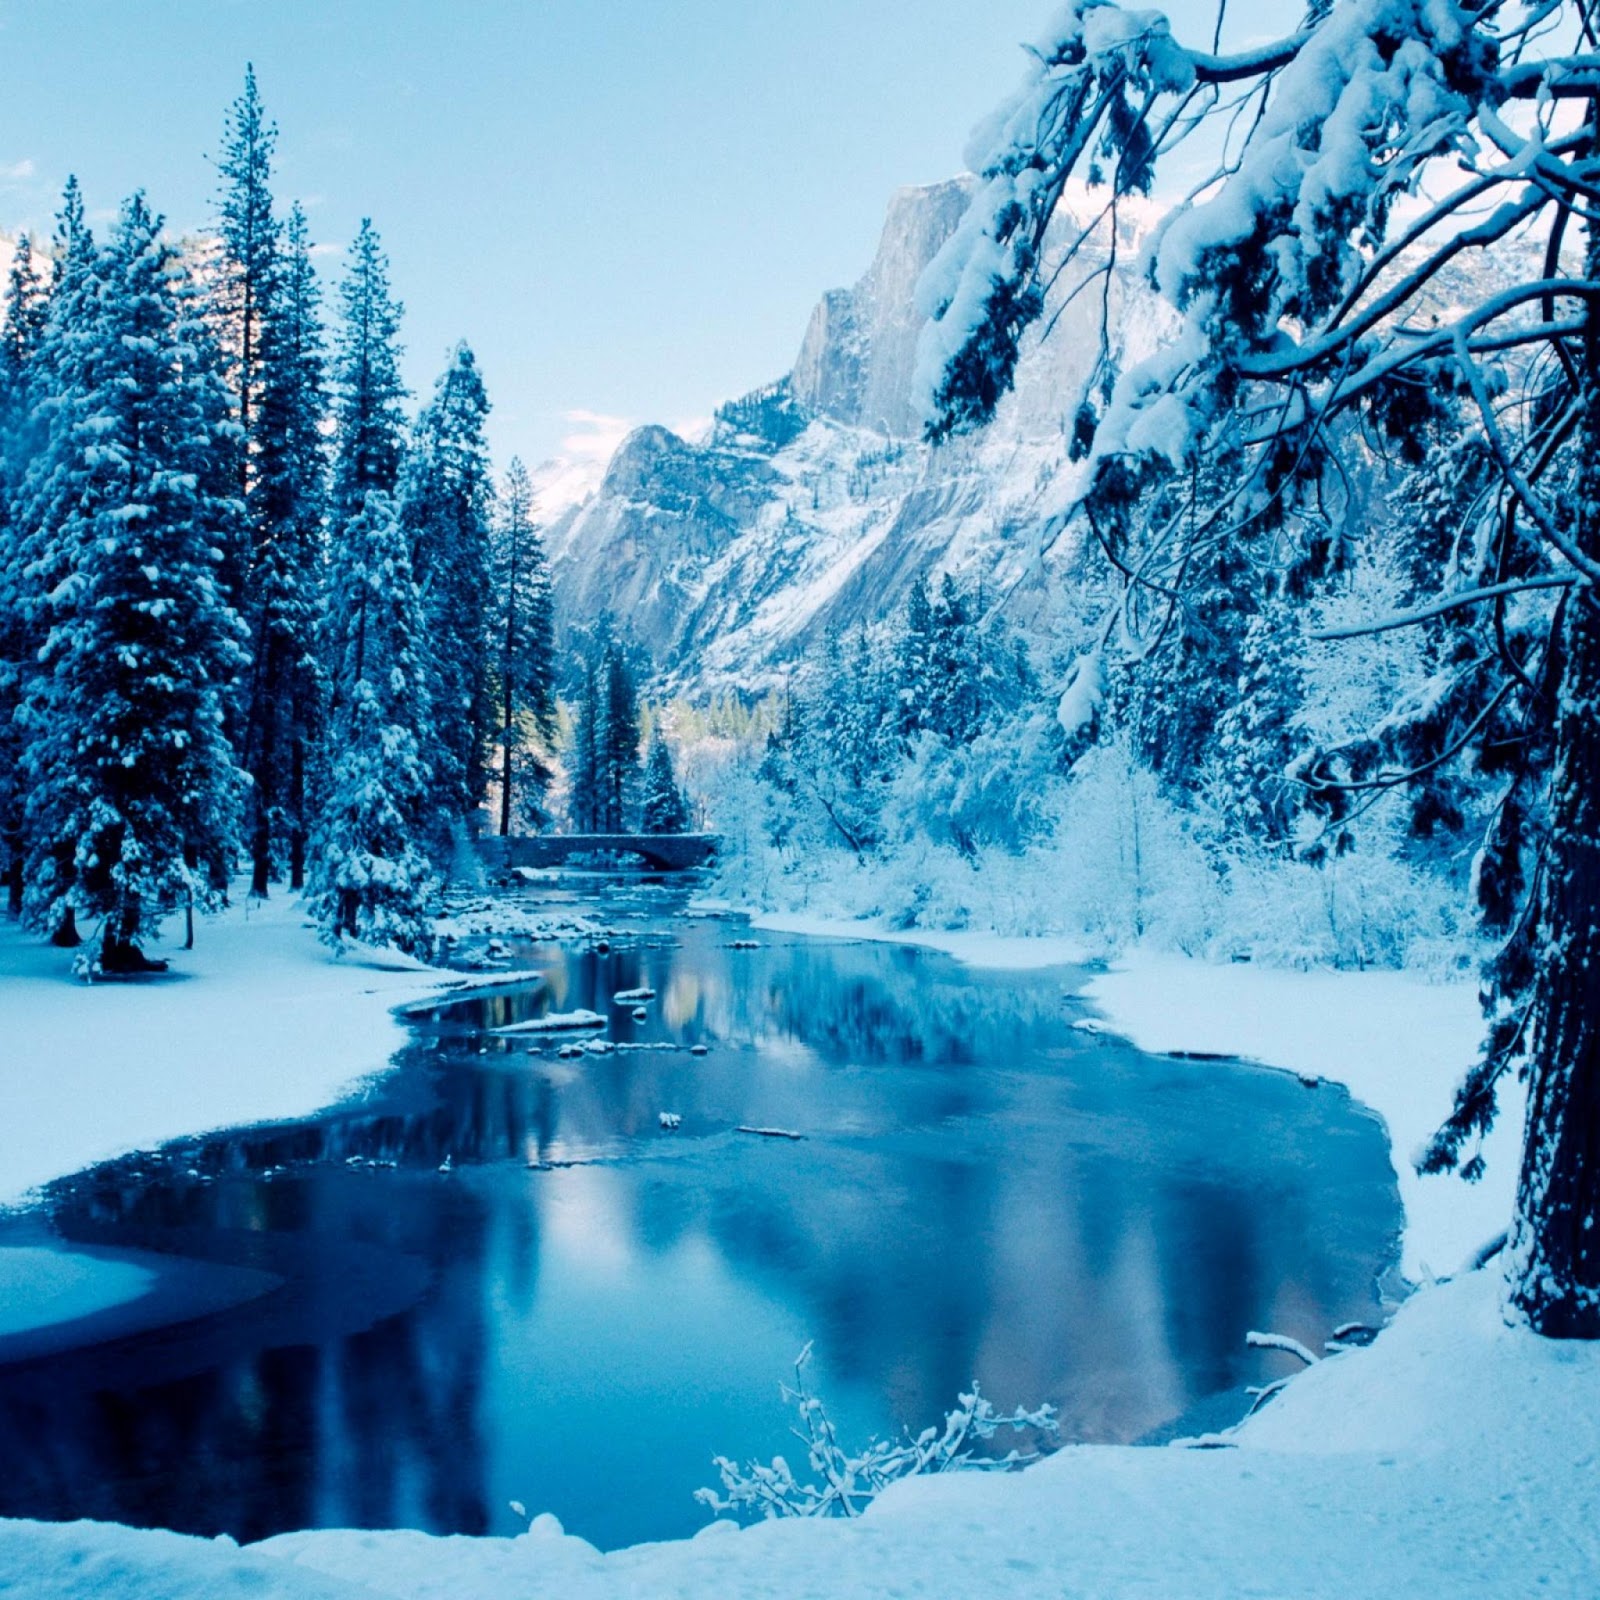 Winter Themed HD Wallpaper For iPad Gadgets Apps And Flash Games